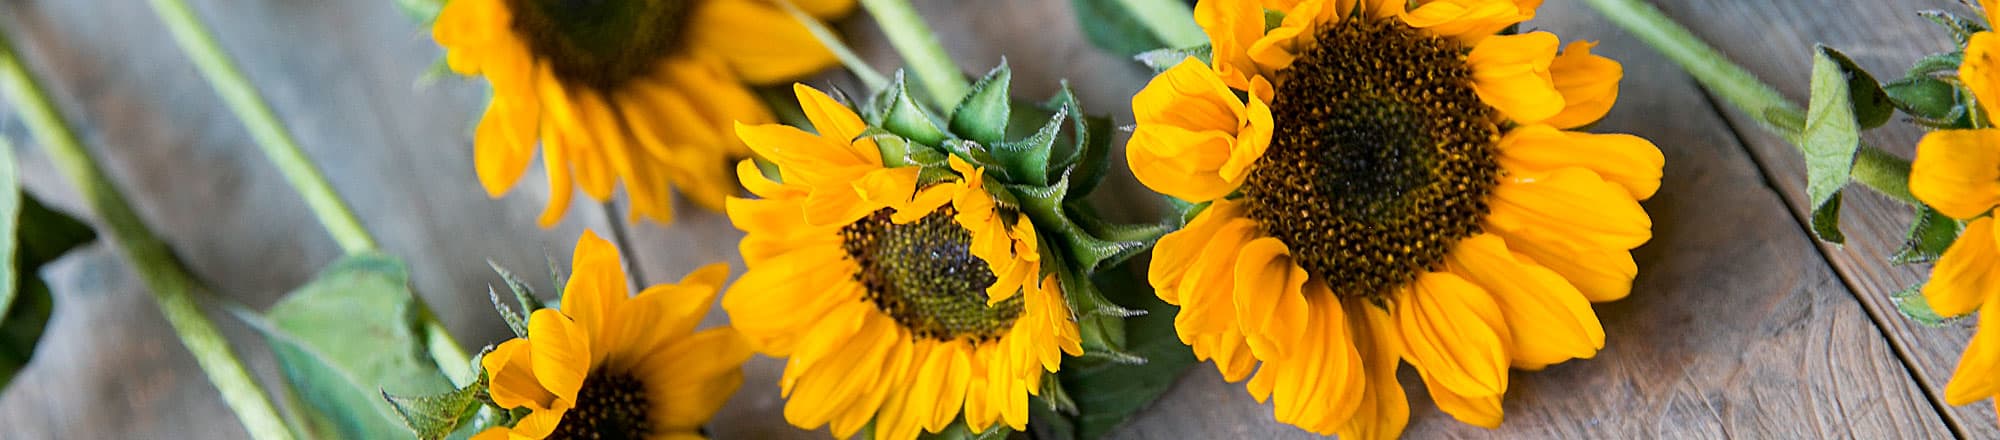 How to keep sunflowers in the vase 